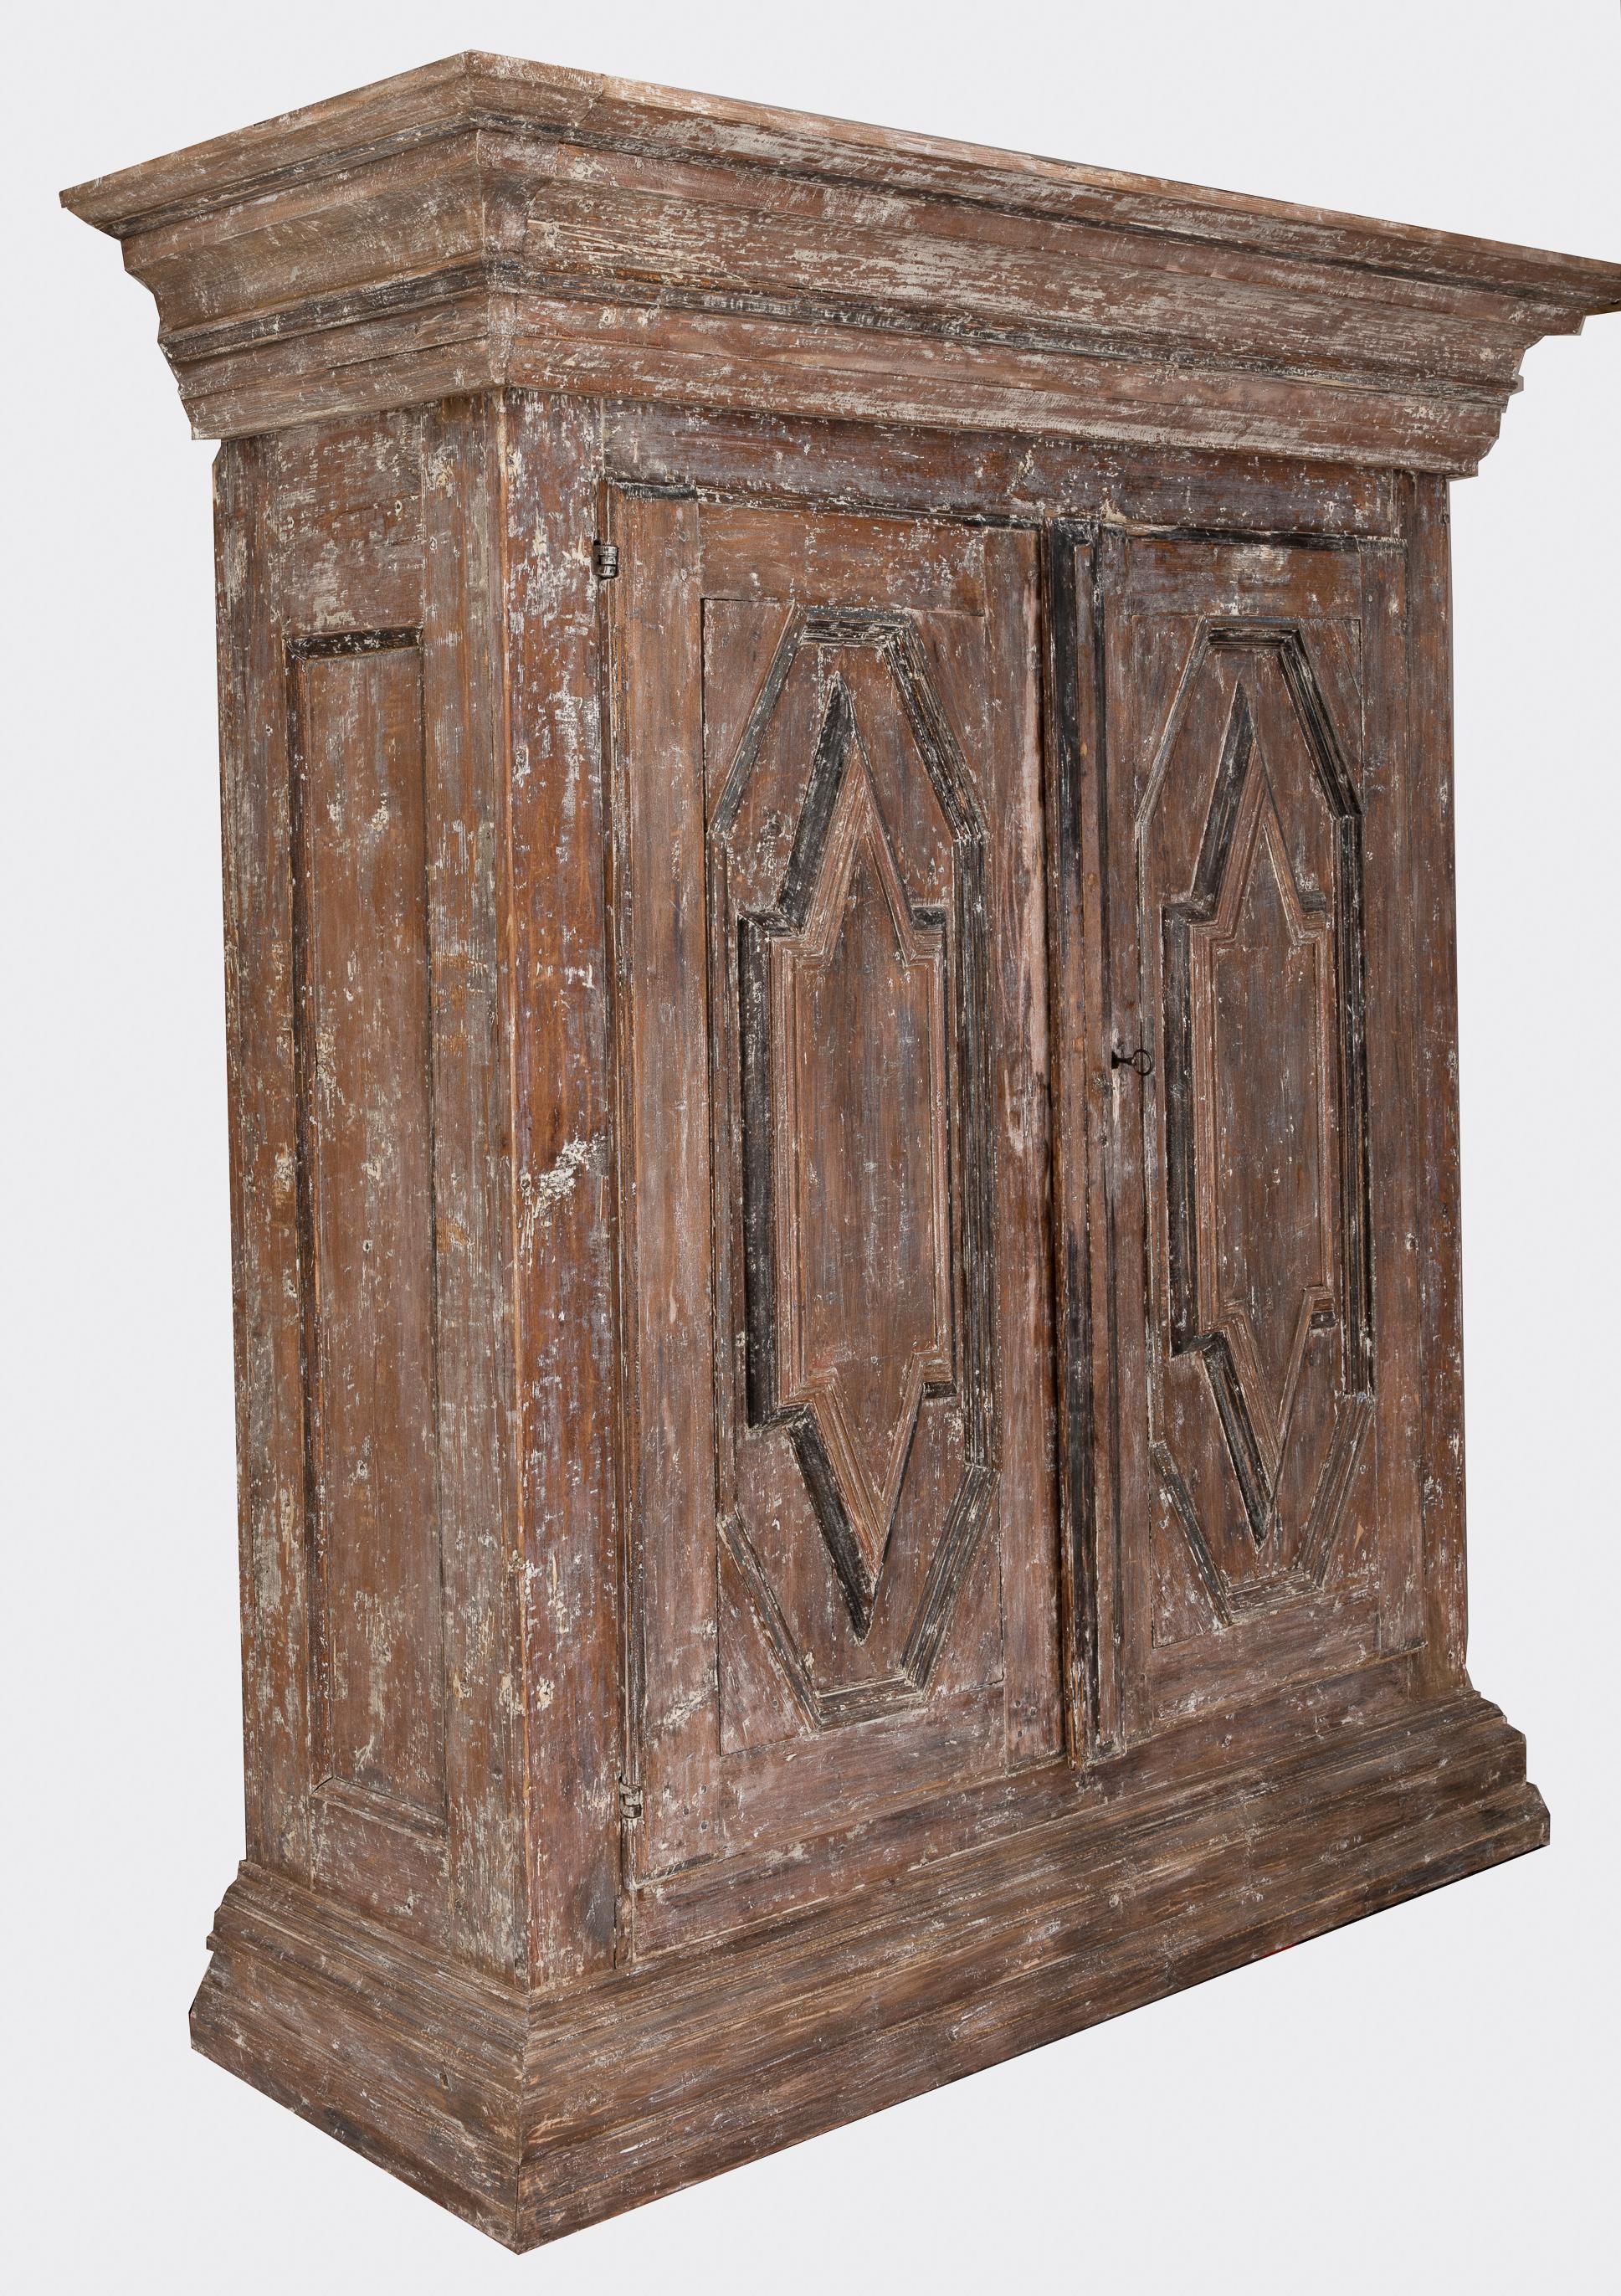 A 19th century Northern European cabinet in the Baroque style, beautifully carved and hand-scraped to the original exterior paint surface. Inside three fixed shelves. Original lock.
   